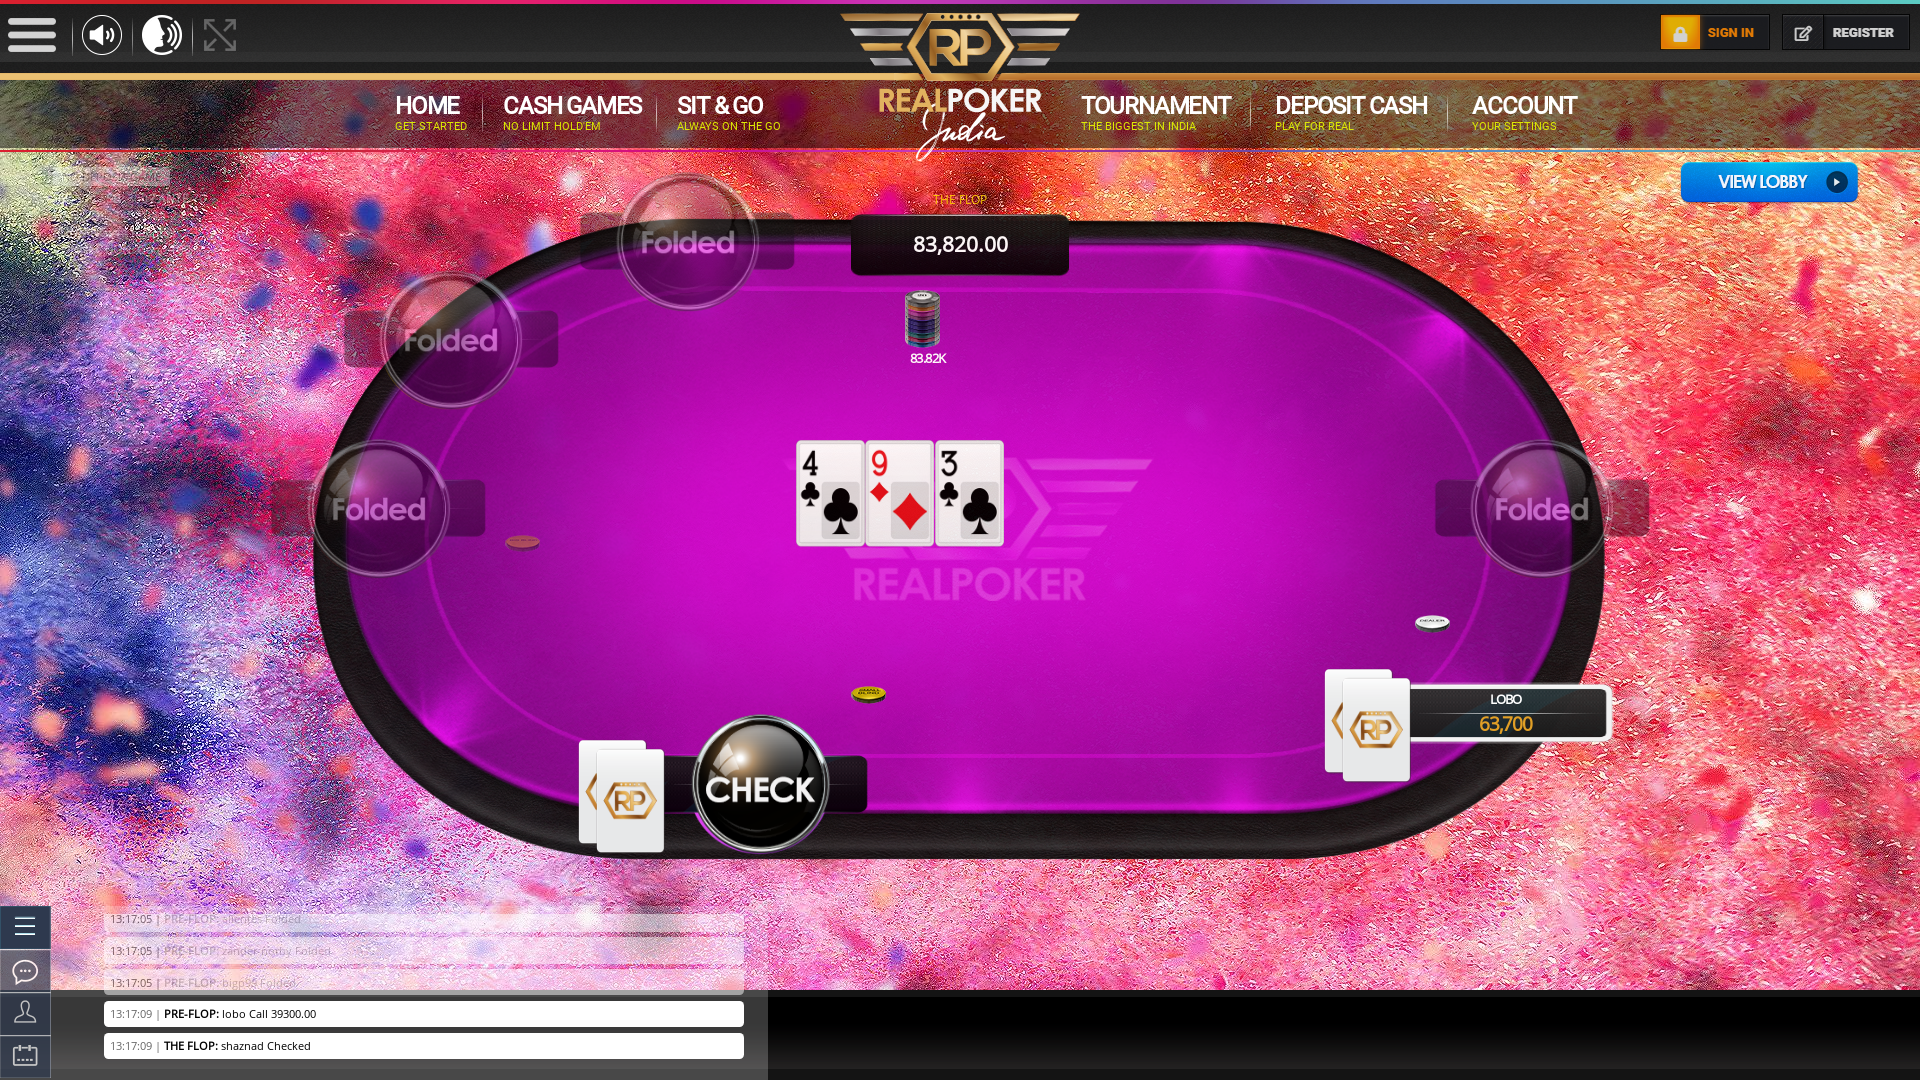 Indian online poker on a 10 player table in the 43rd minute match up